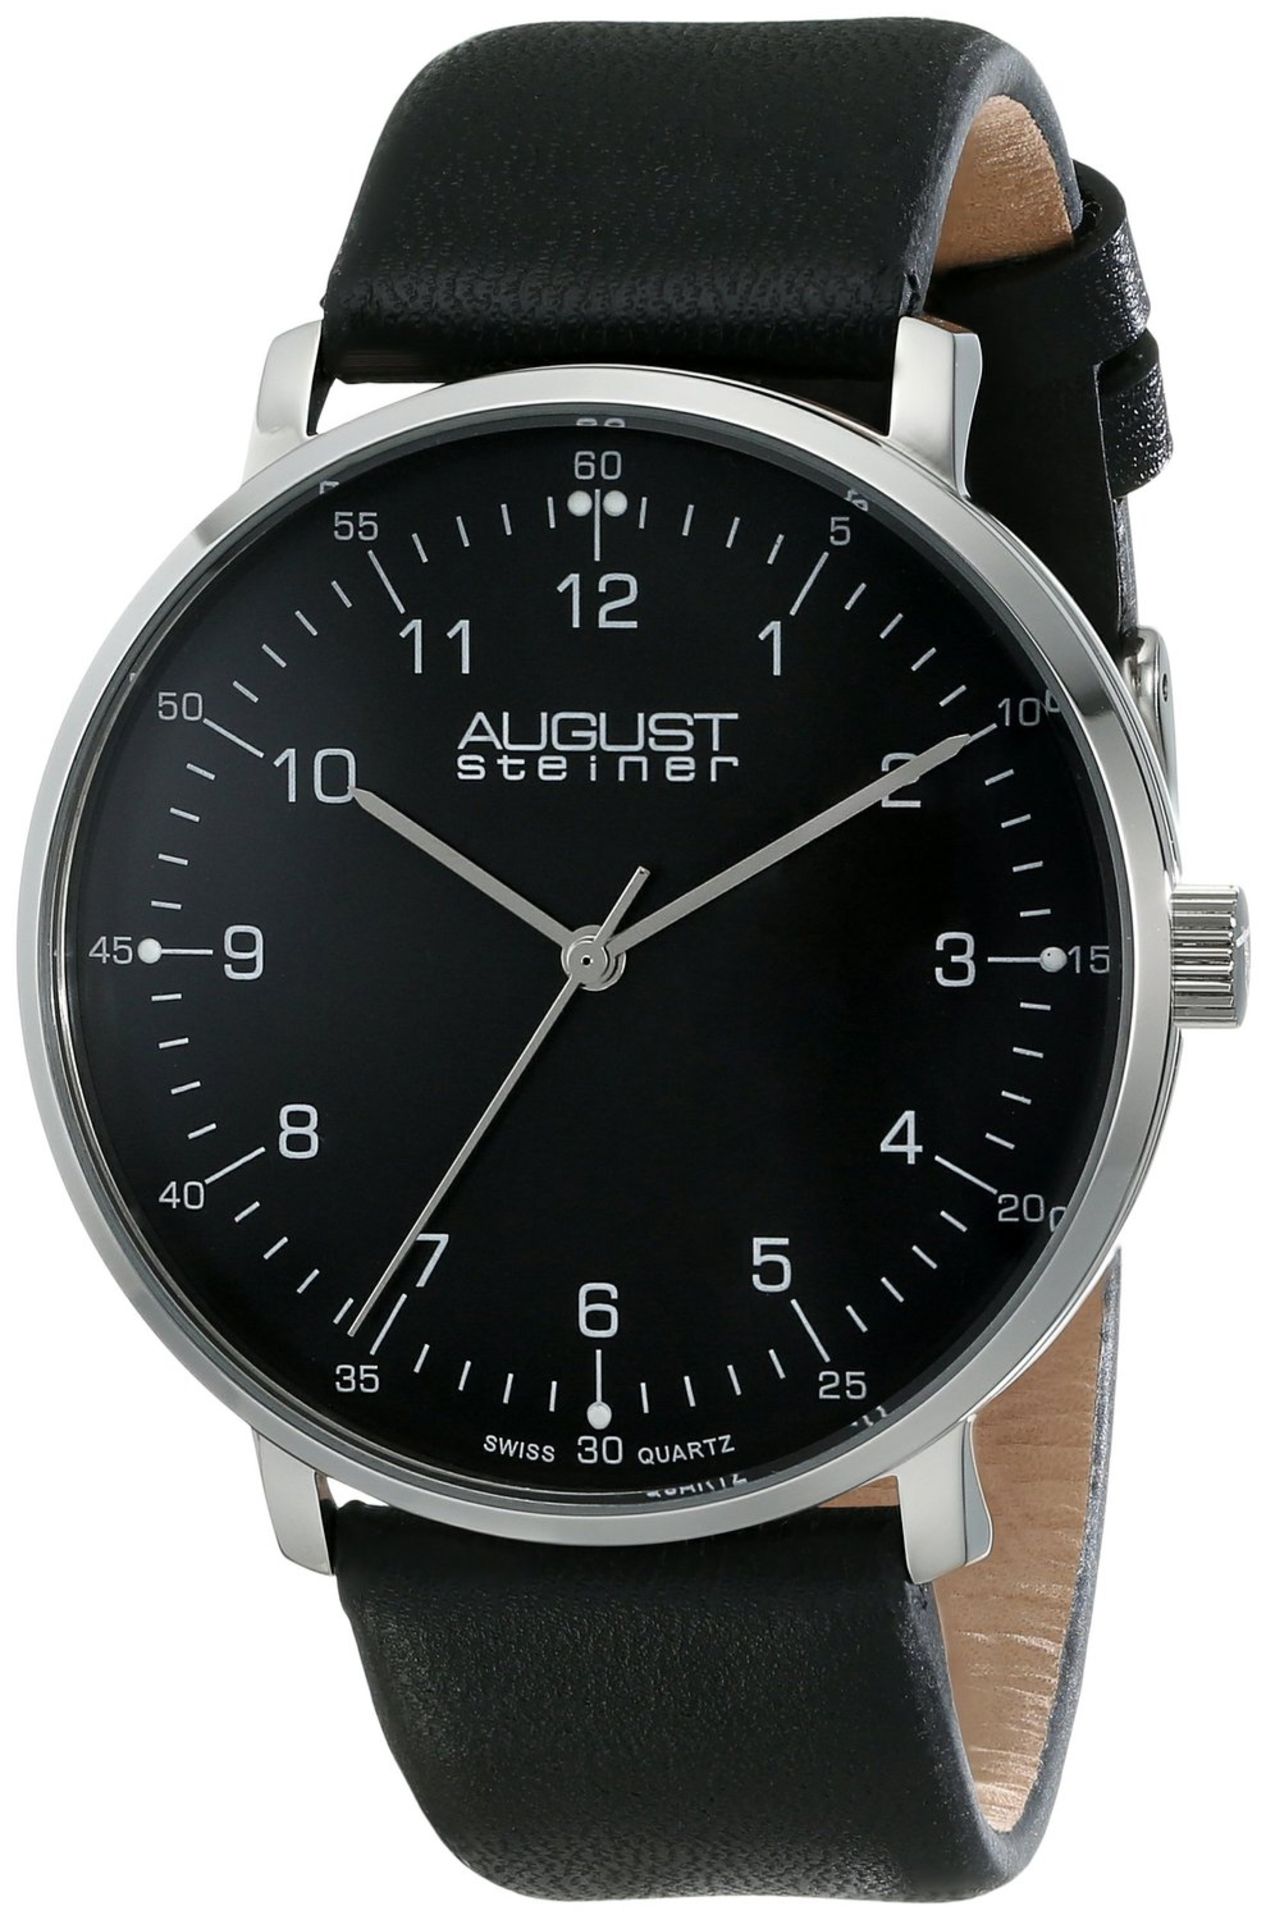 August Steiner Men's AS8090BK Stainless Steel Watch with Black Leather Band – BRAND NEW, BOXED – RRP